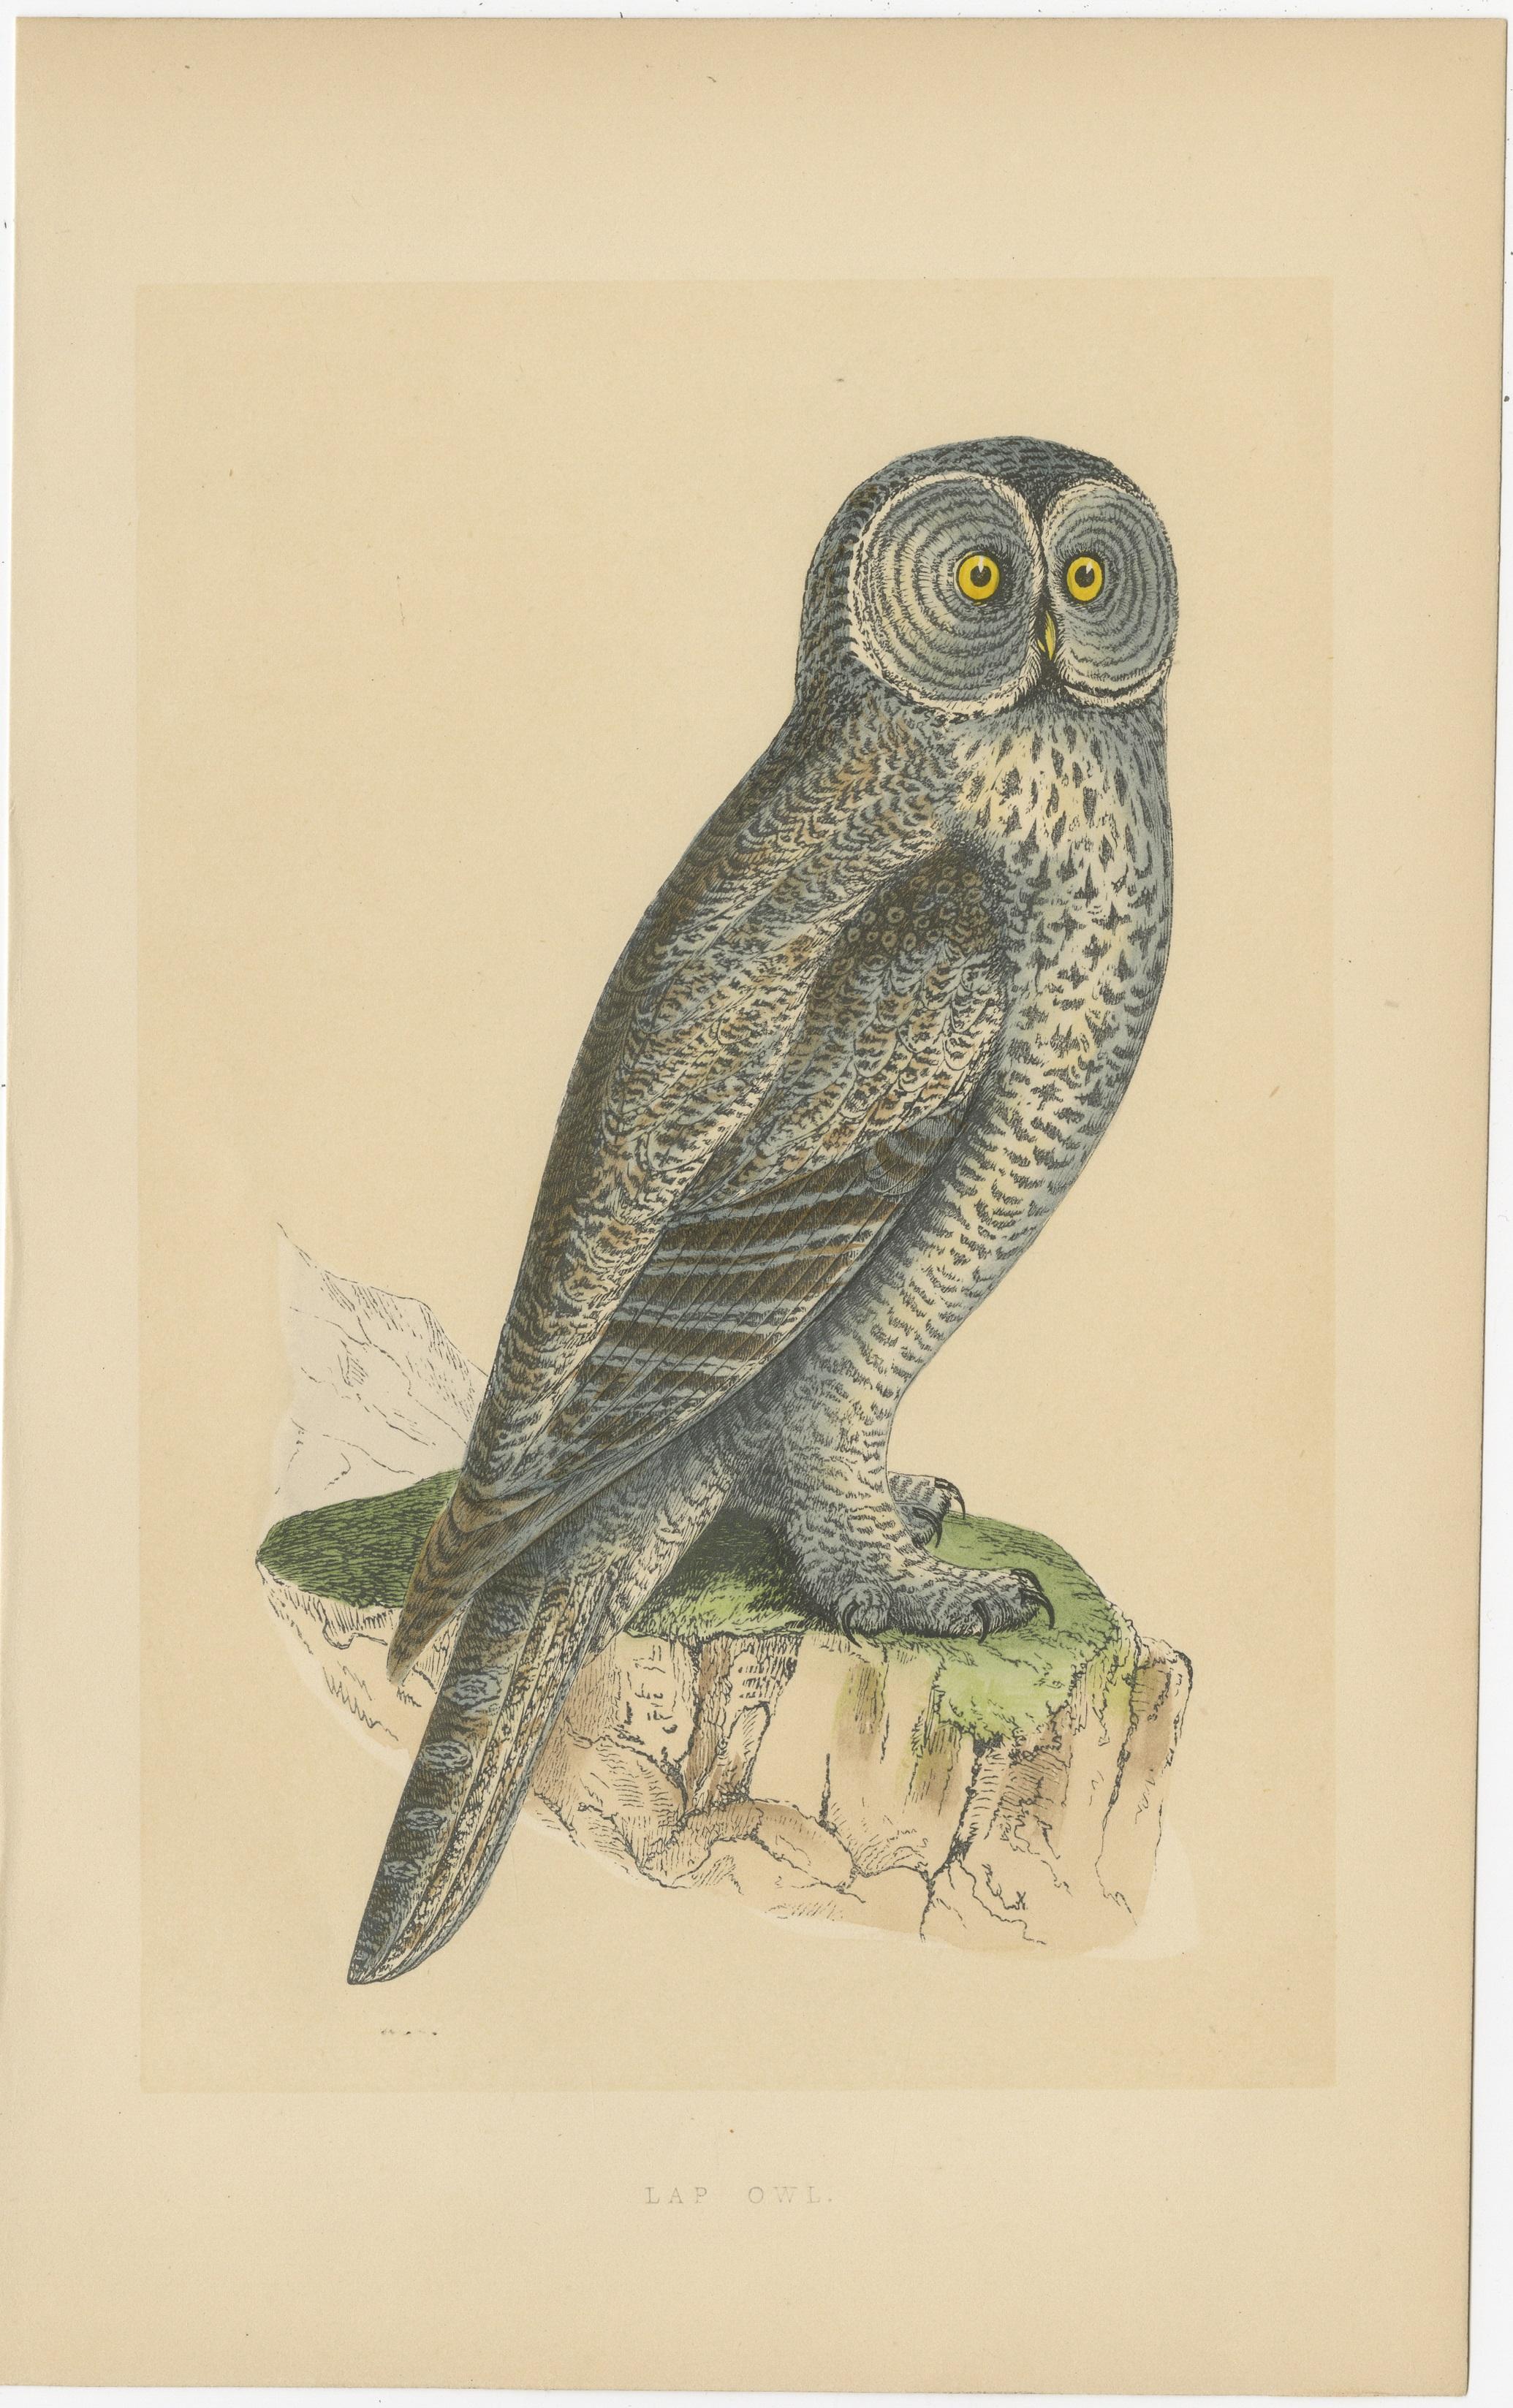 Antique bird print titled 'Lap Owl'. Original old bird print of a lap owl. This print originates from 'A history of the birds of Europe, not observed in the British Isles' by Charles Robert Bree and Benjamin Fawcett. Published circa 1860.